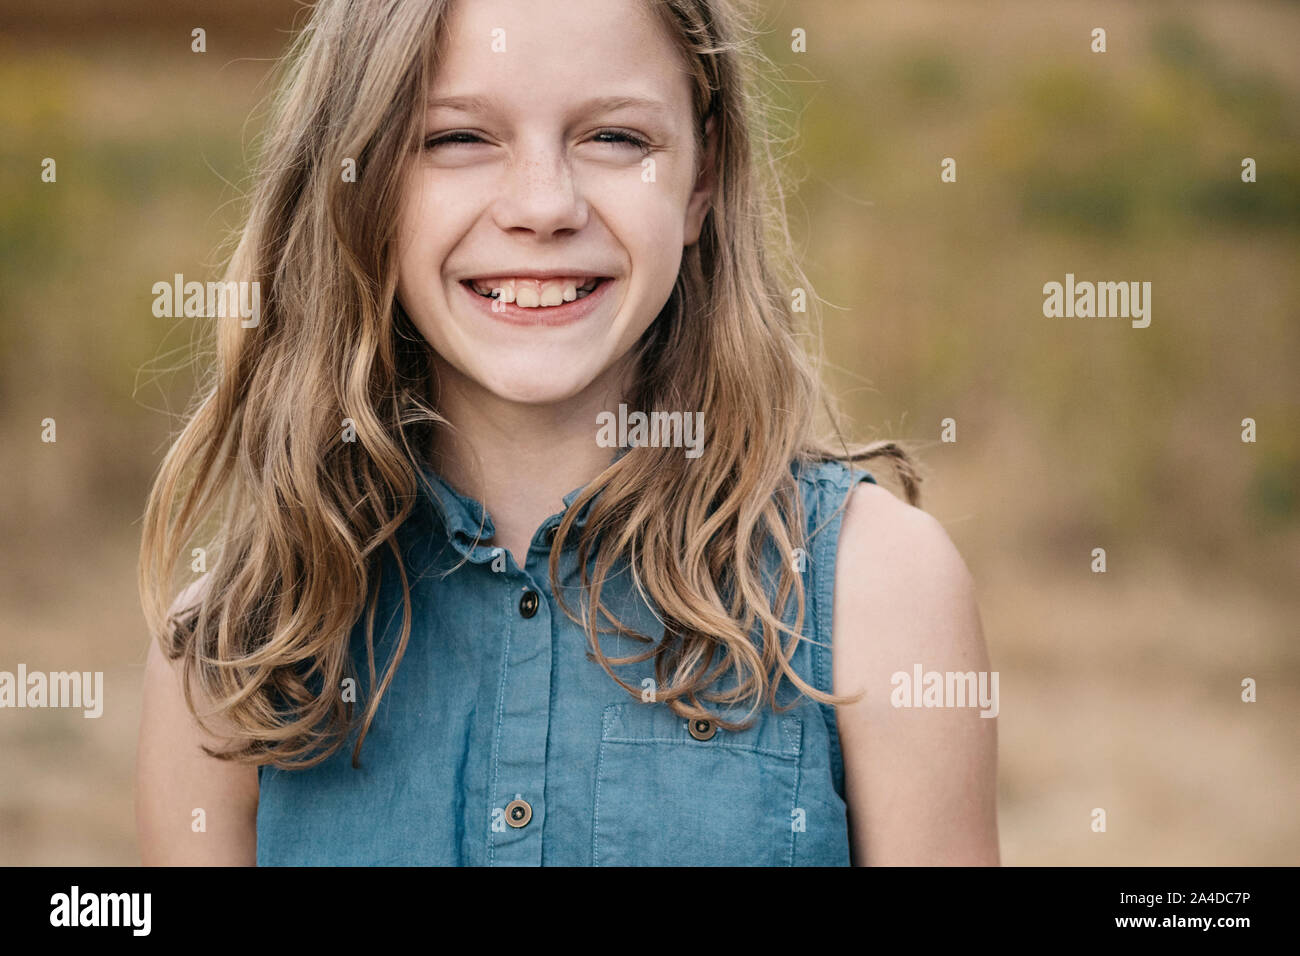 Portrait of a smiling girl with long hair, Netherlands Stock Photo